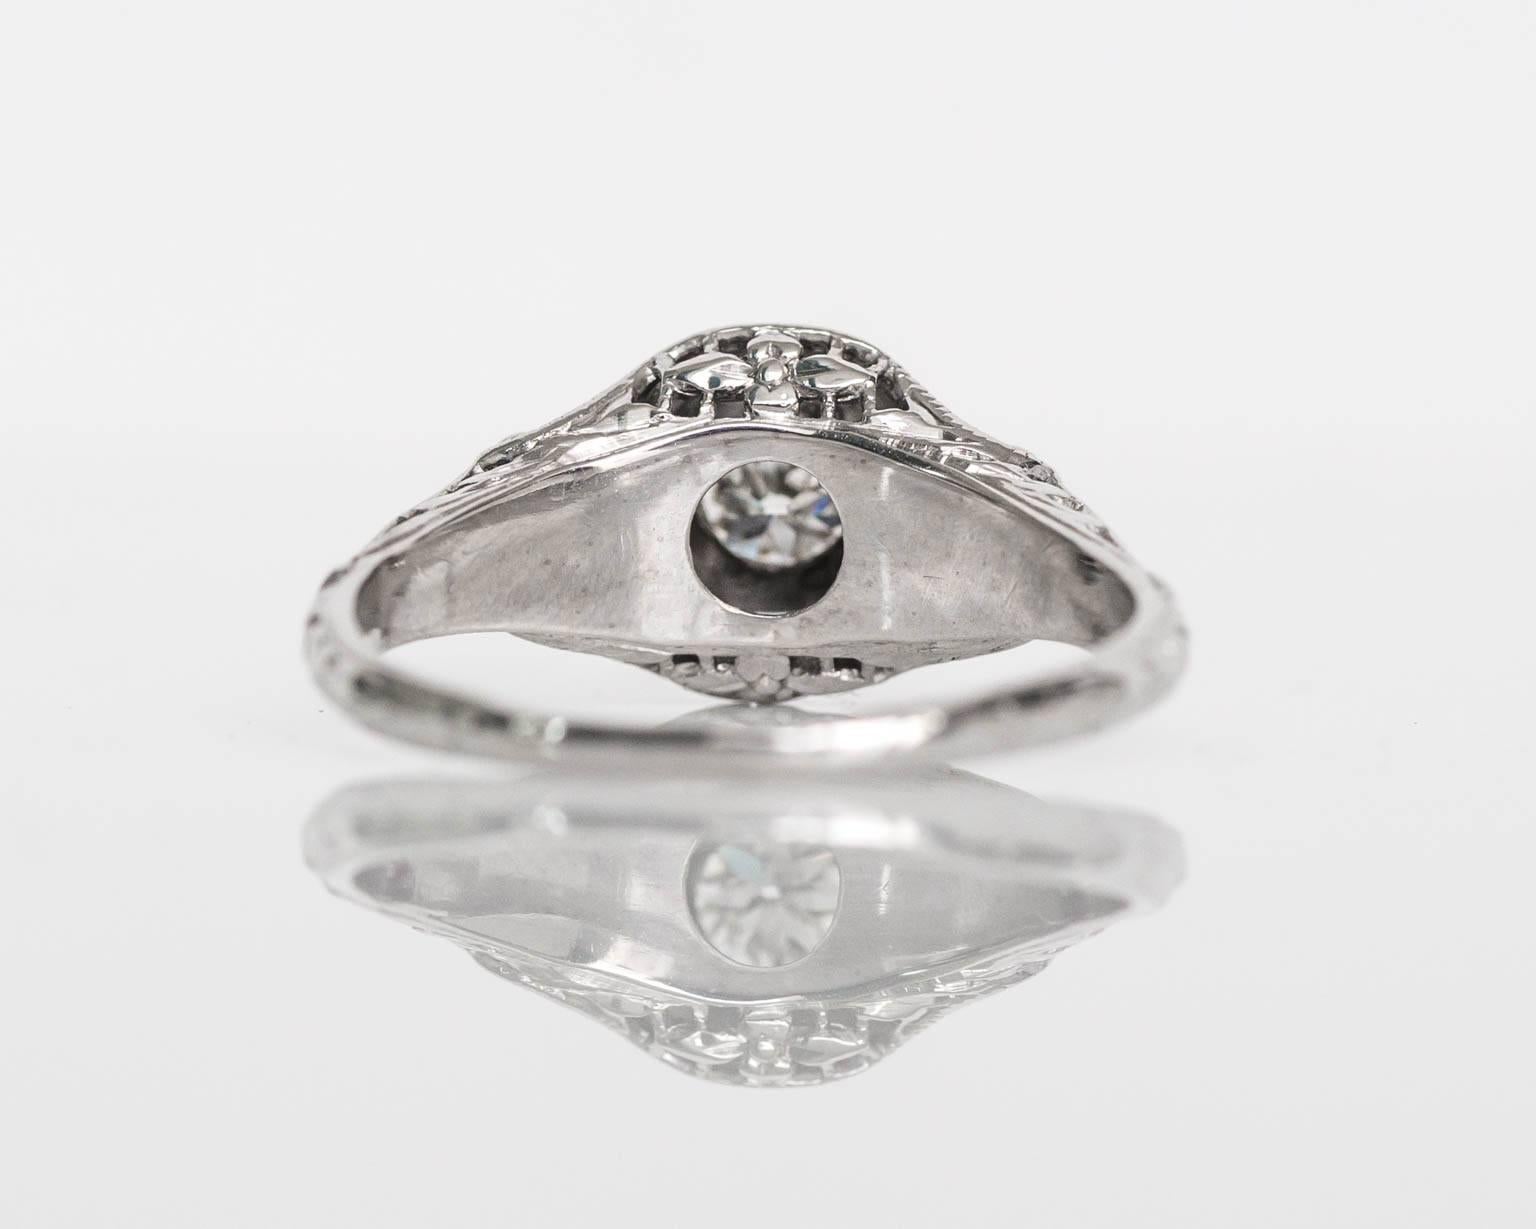 Here we have an absolutely spectacular unique filigree ring from the early 1910's. The center diamond is an absolutely delightful old european cut with great fire and brilliance. It is set in a smooth bezel setting style and surrounded by some of